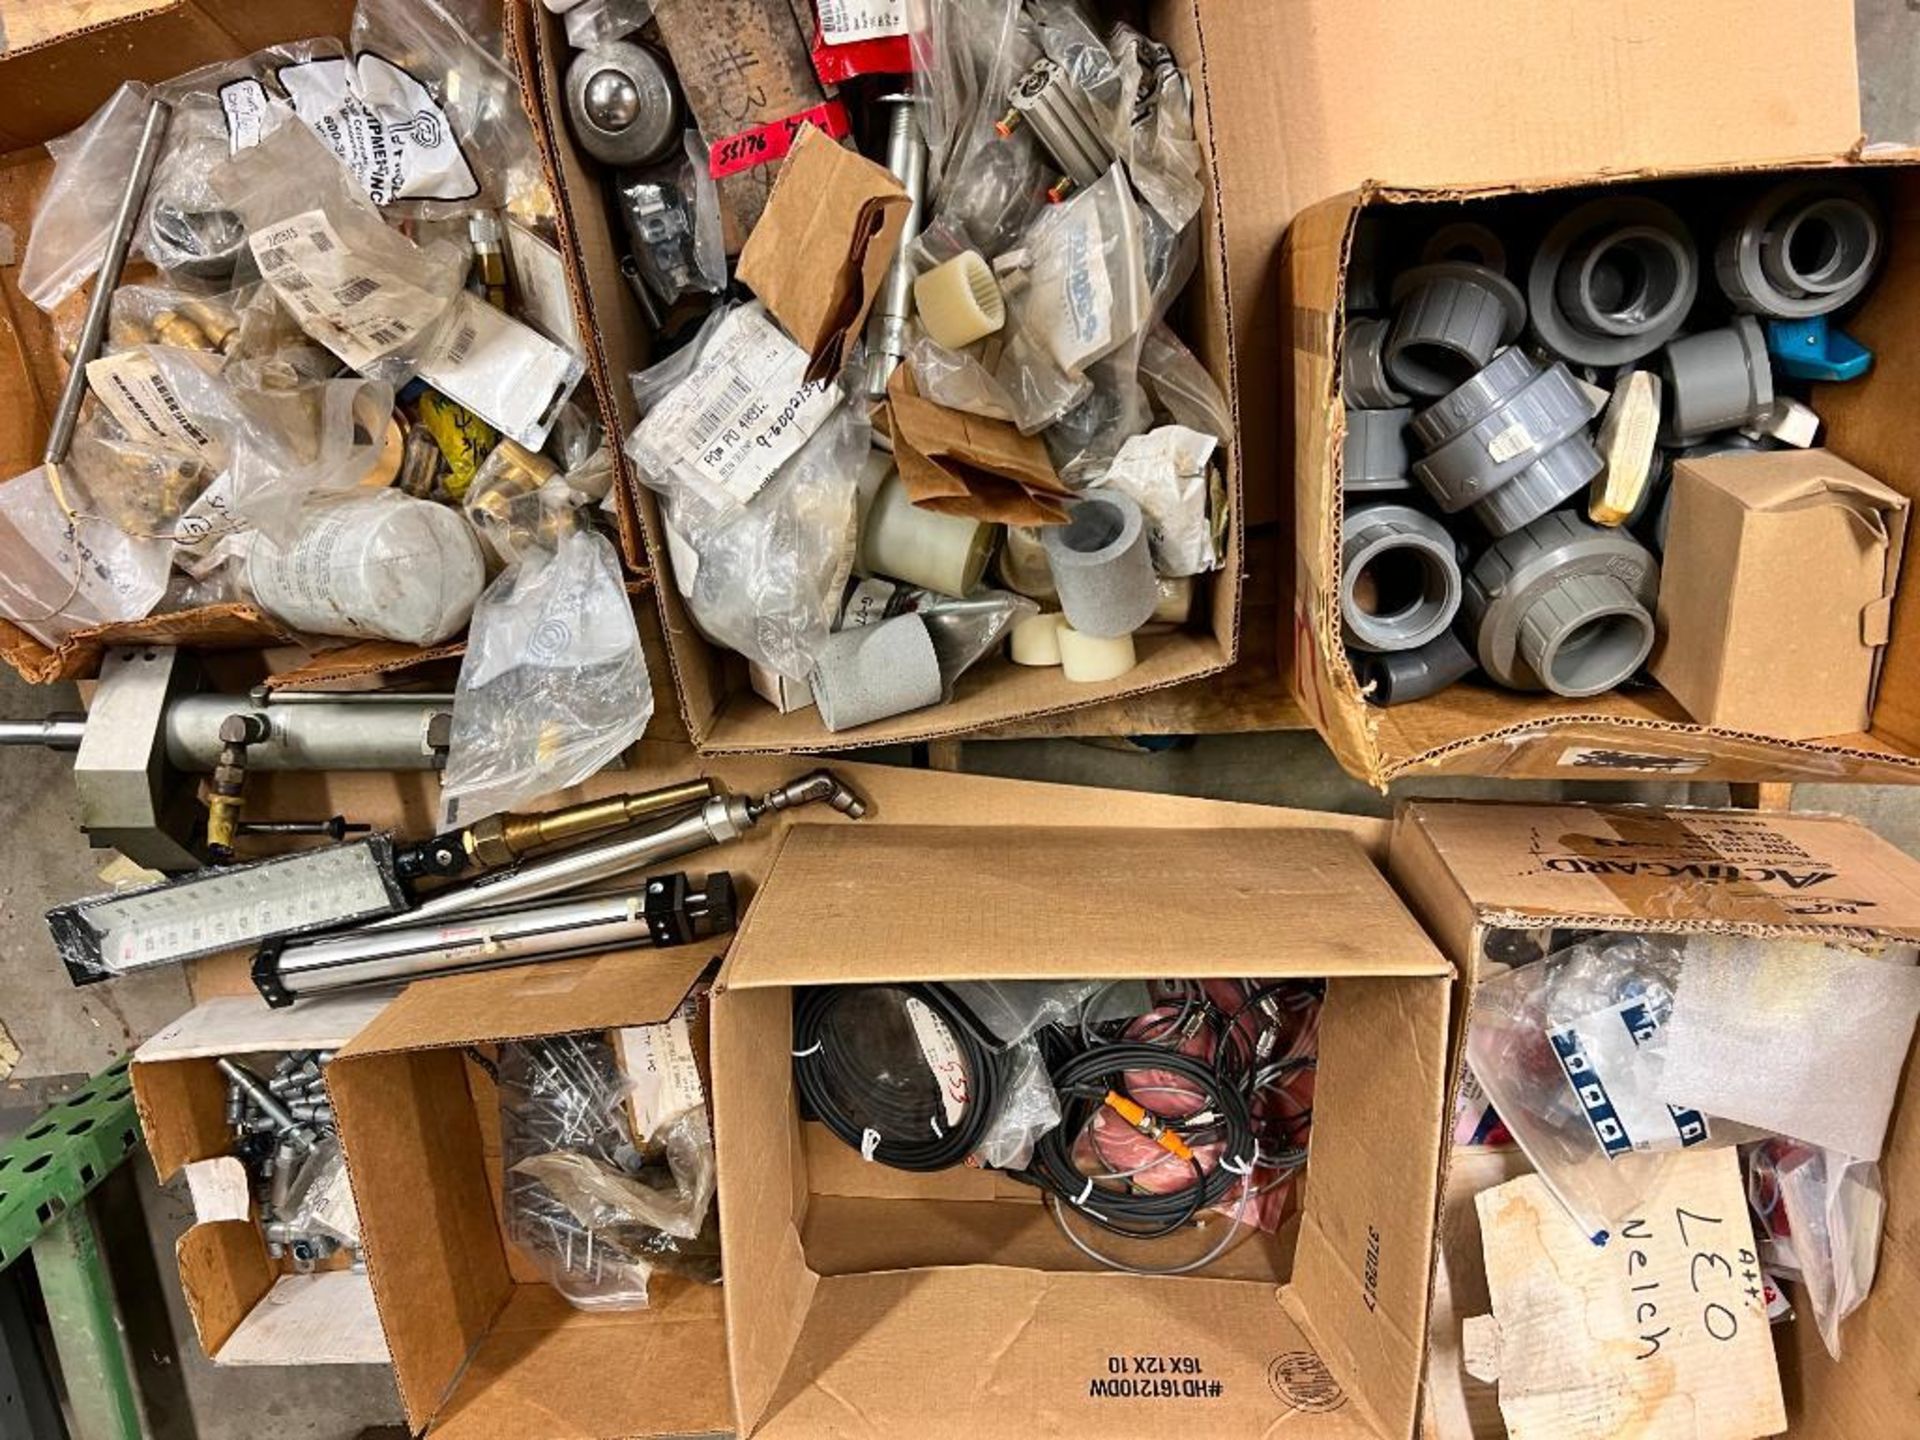 MISC. SKID OF PVC FITTINGS, BRASS FITTINGS, CHAIN LINKS, PNEUMATIC CYLINDERS, & BOLTS